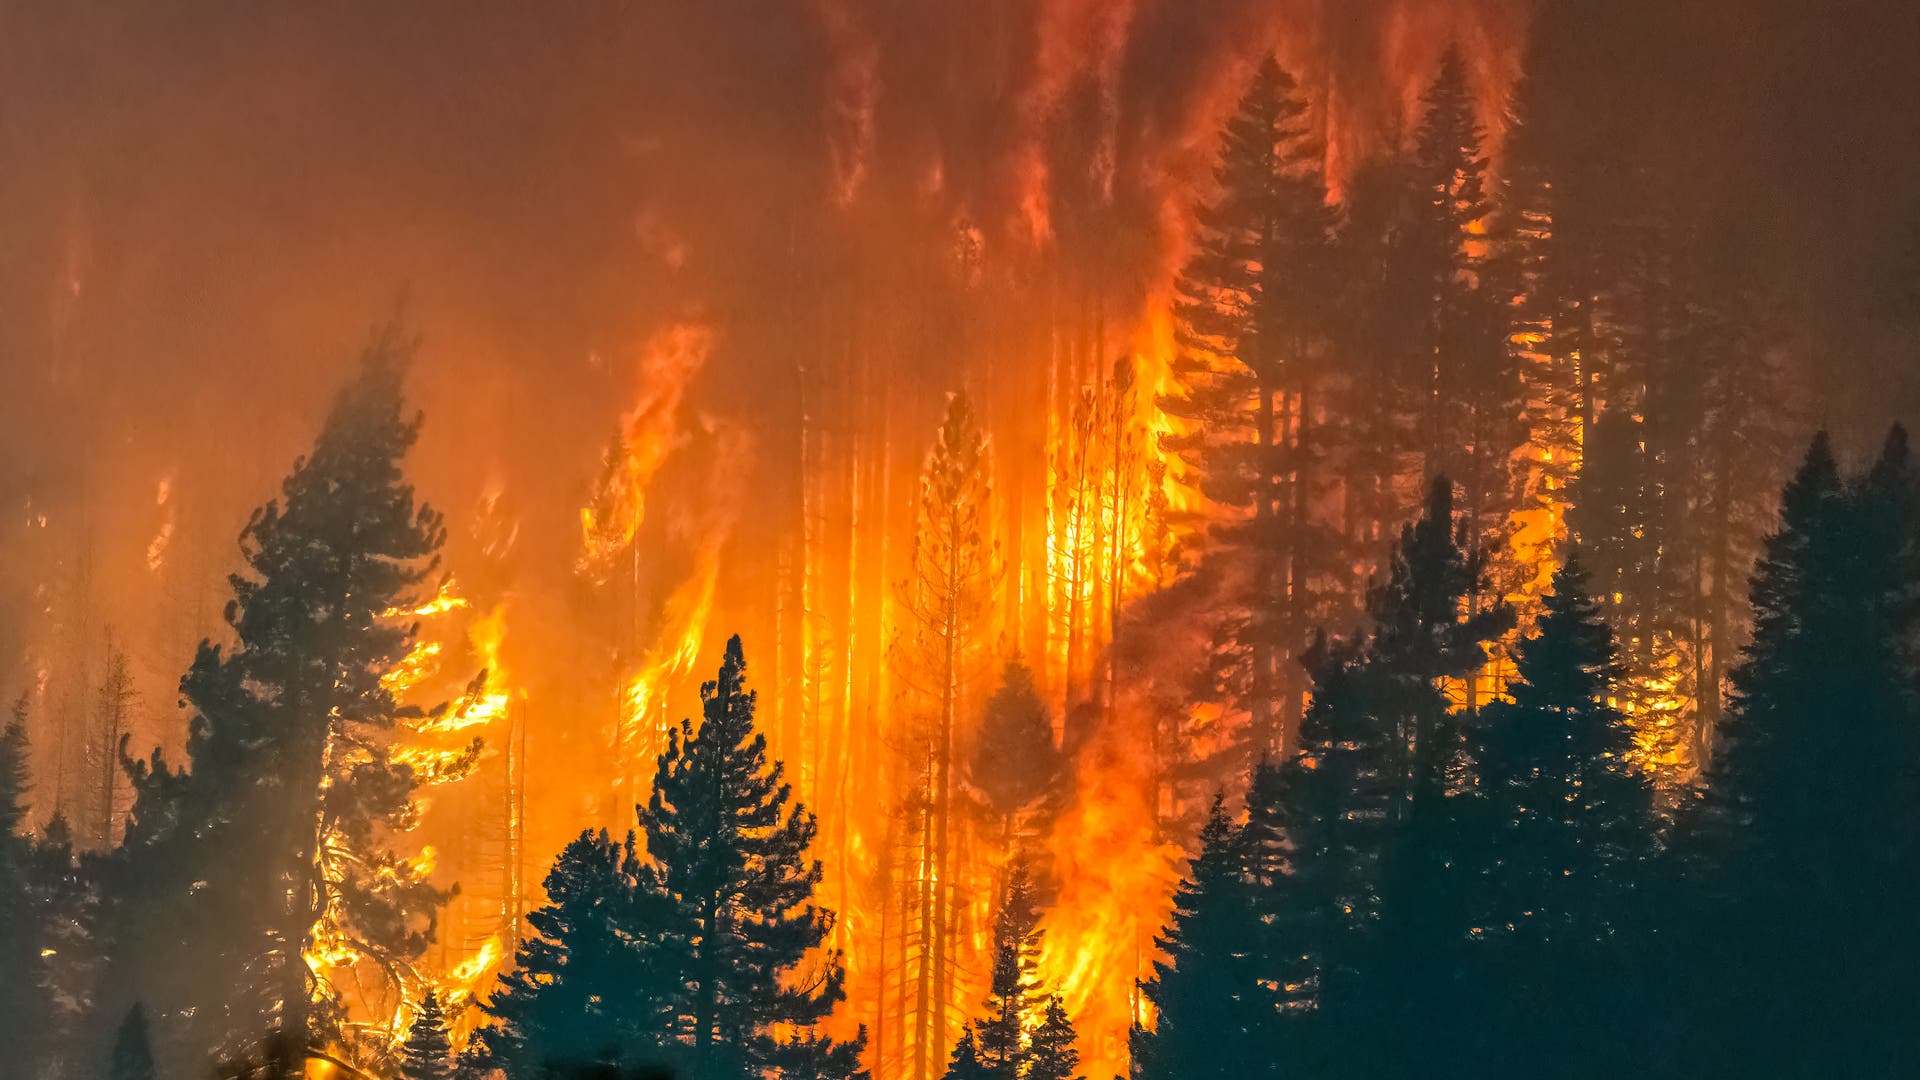 Climate change: no ice, more fire in the West